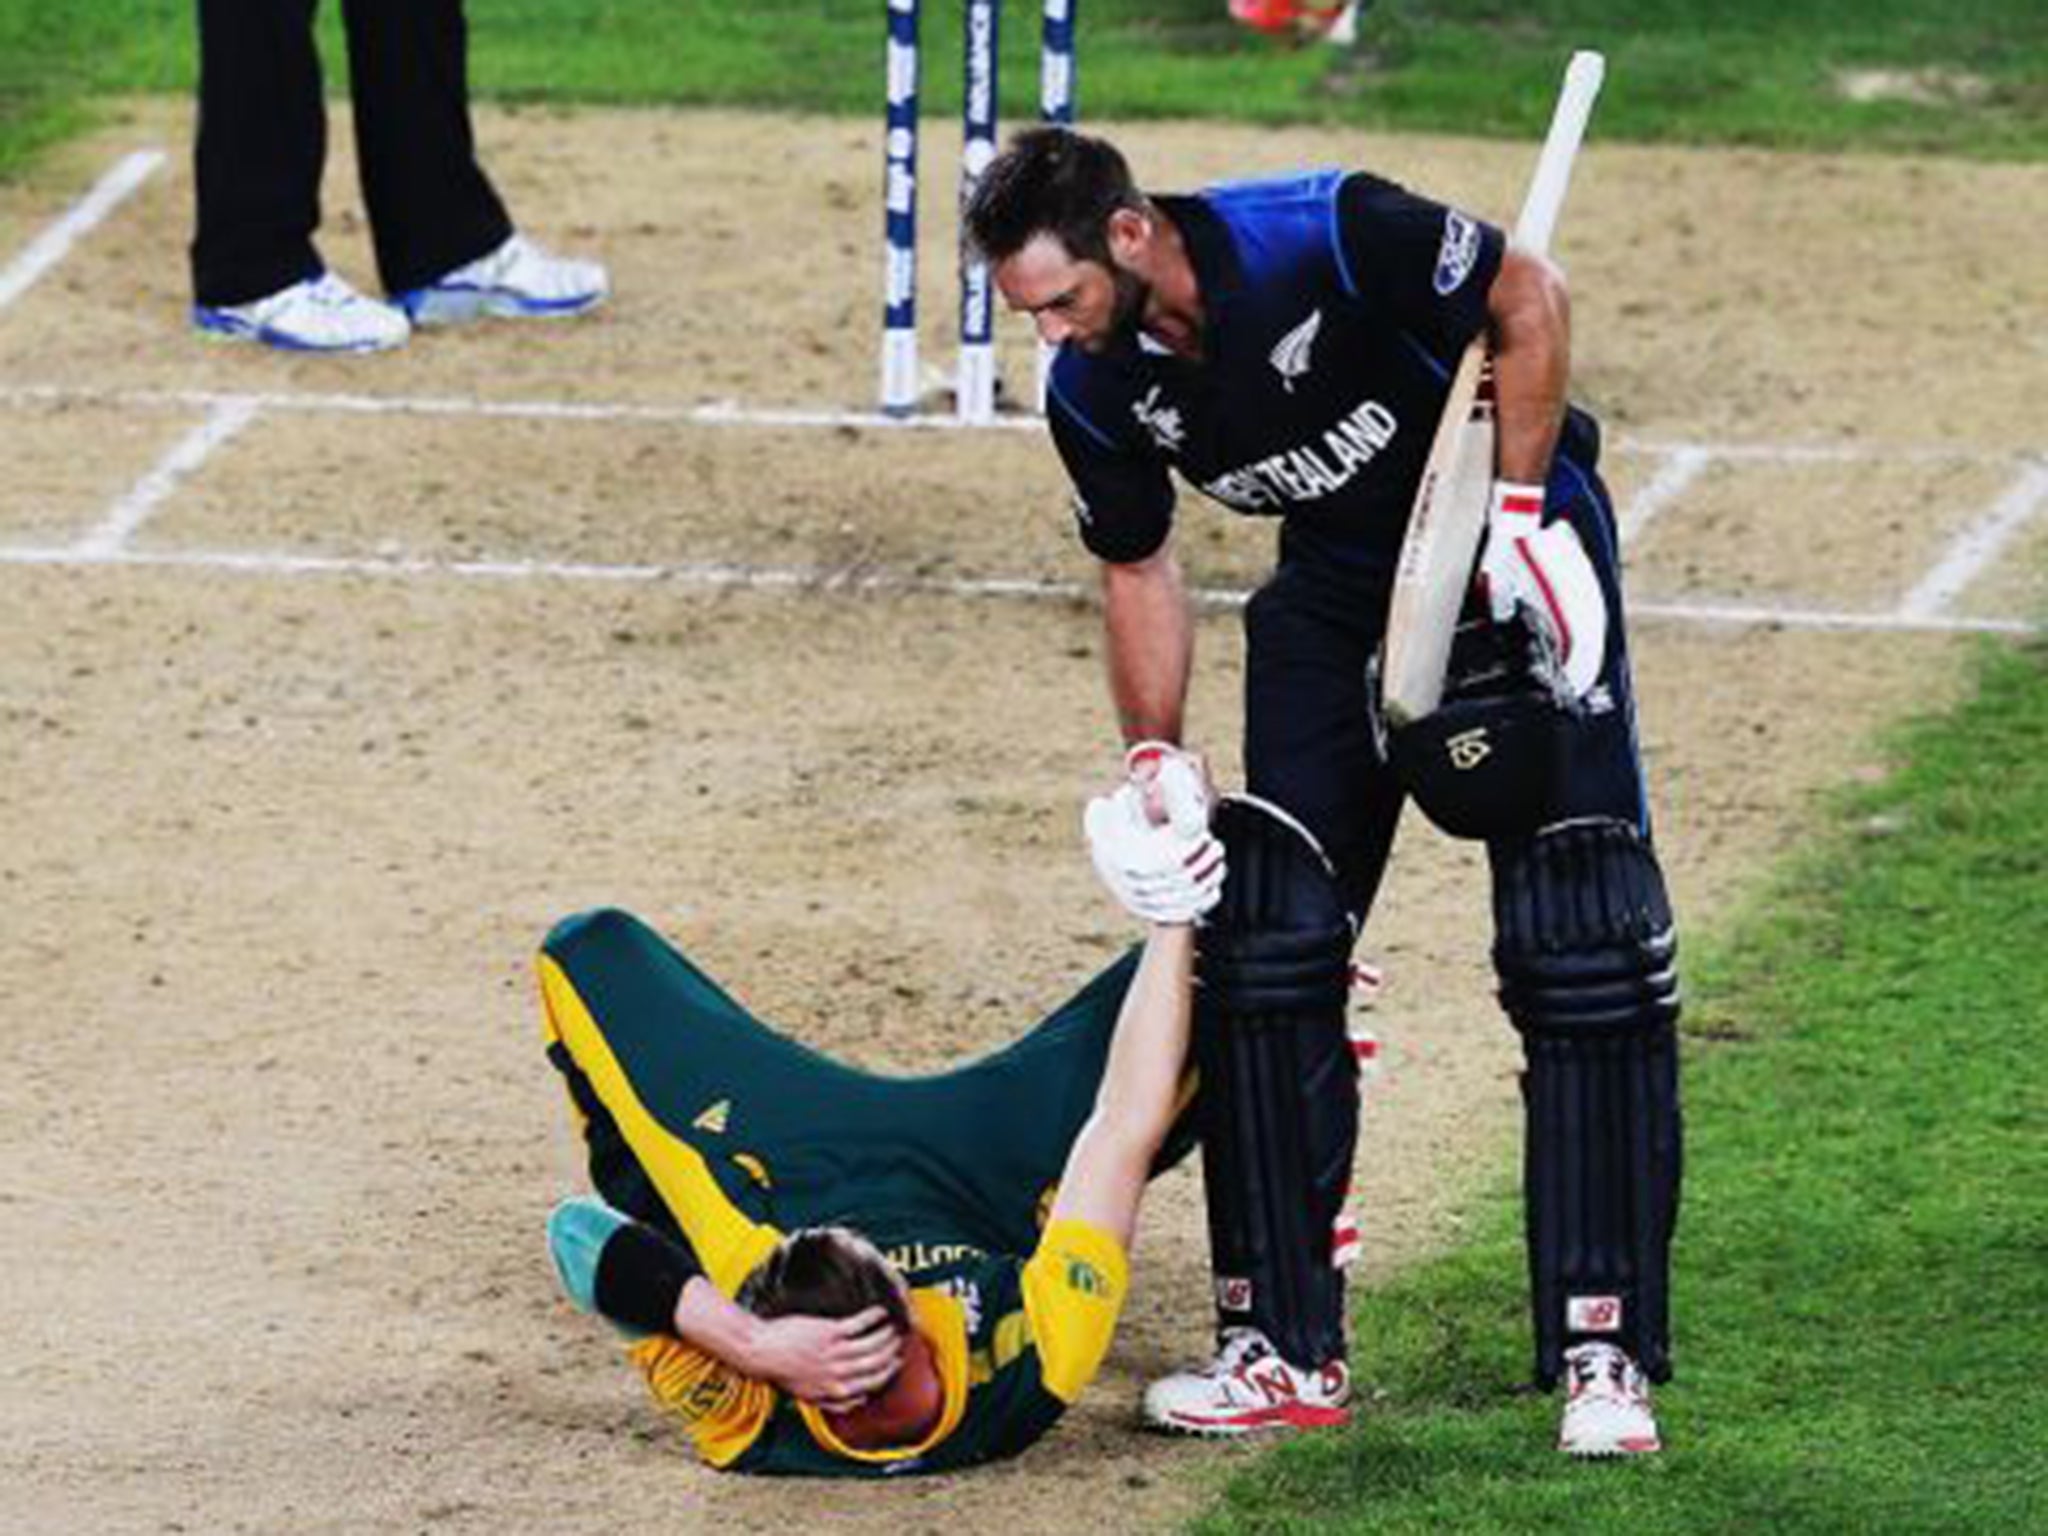 New Zealand’s Grant Elliott helps South Africa’s Dale Steyn up after their semi-final